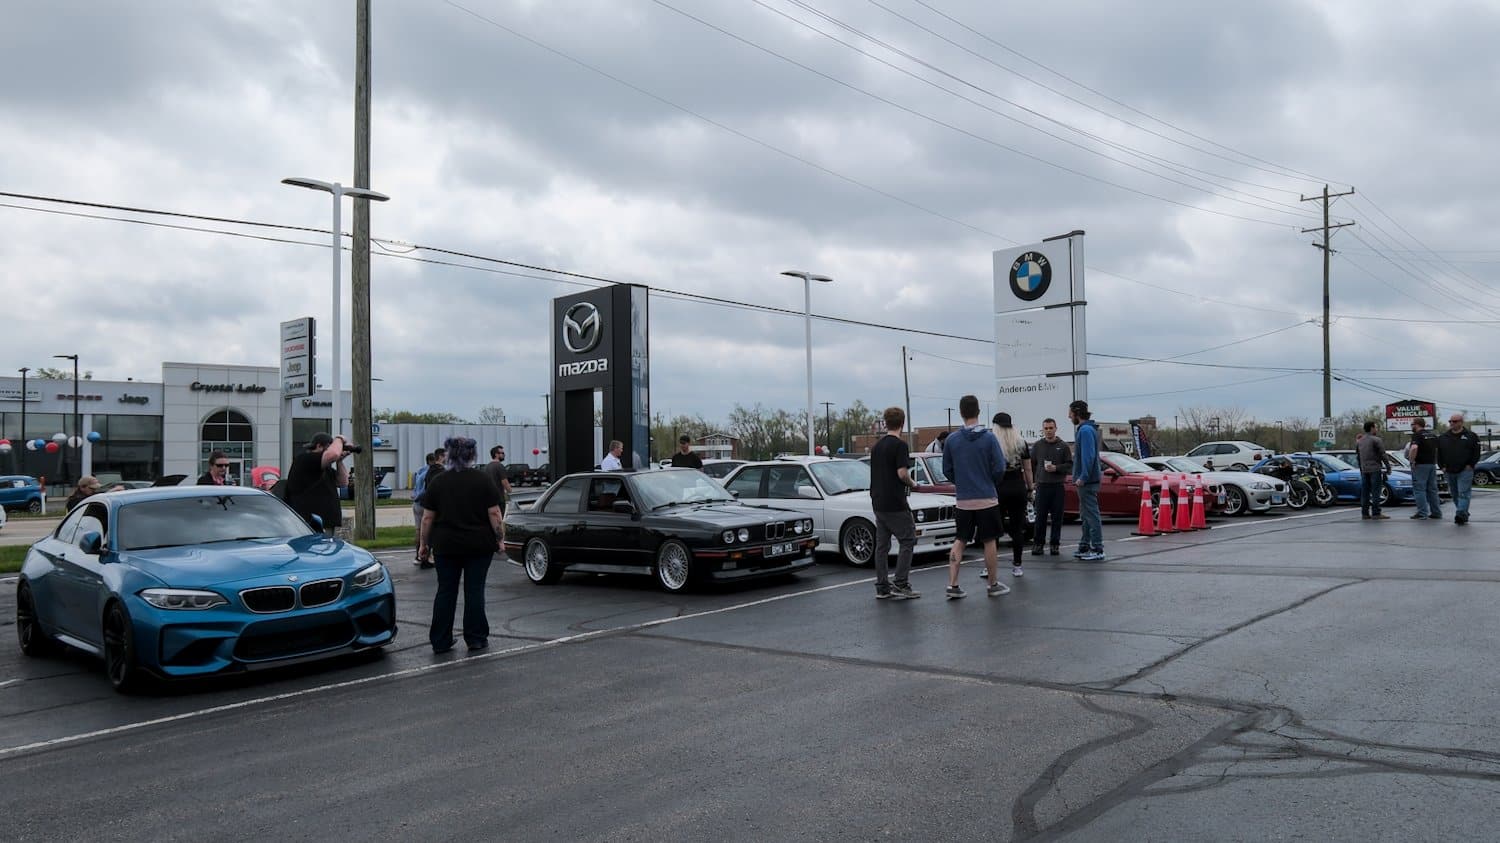 Checking out the Windy City BMW cars at the Cars & Coffee at BMW of Crystal Lake.